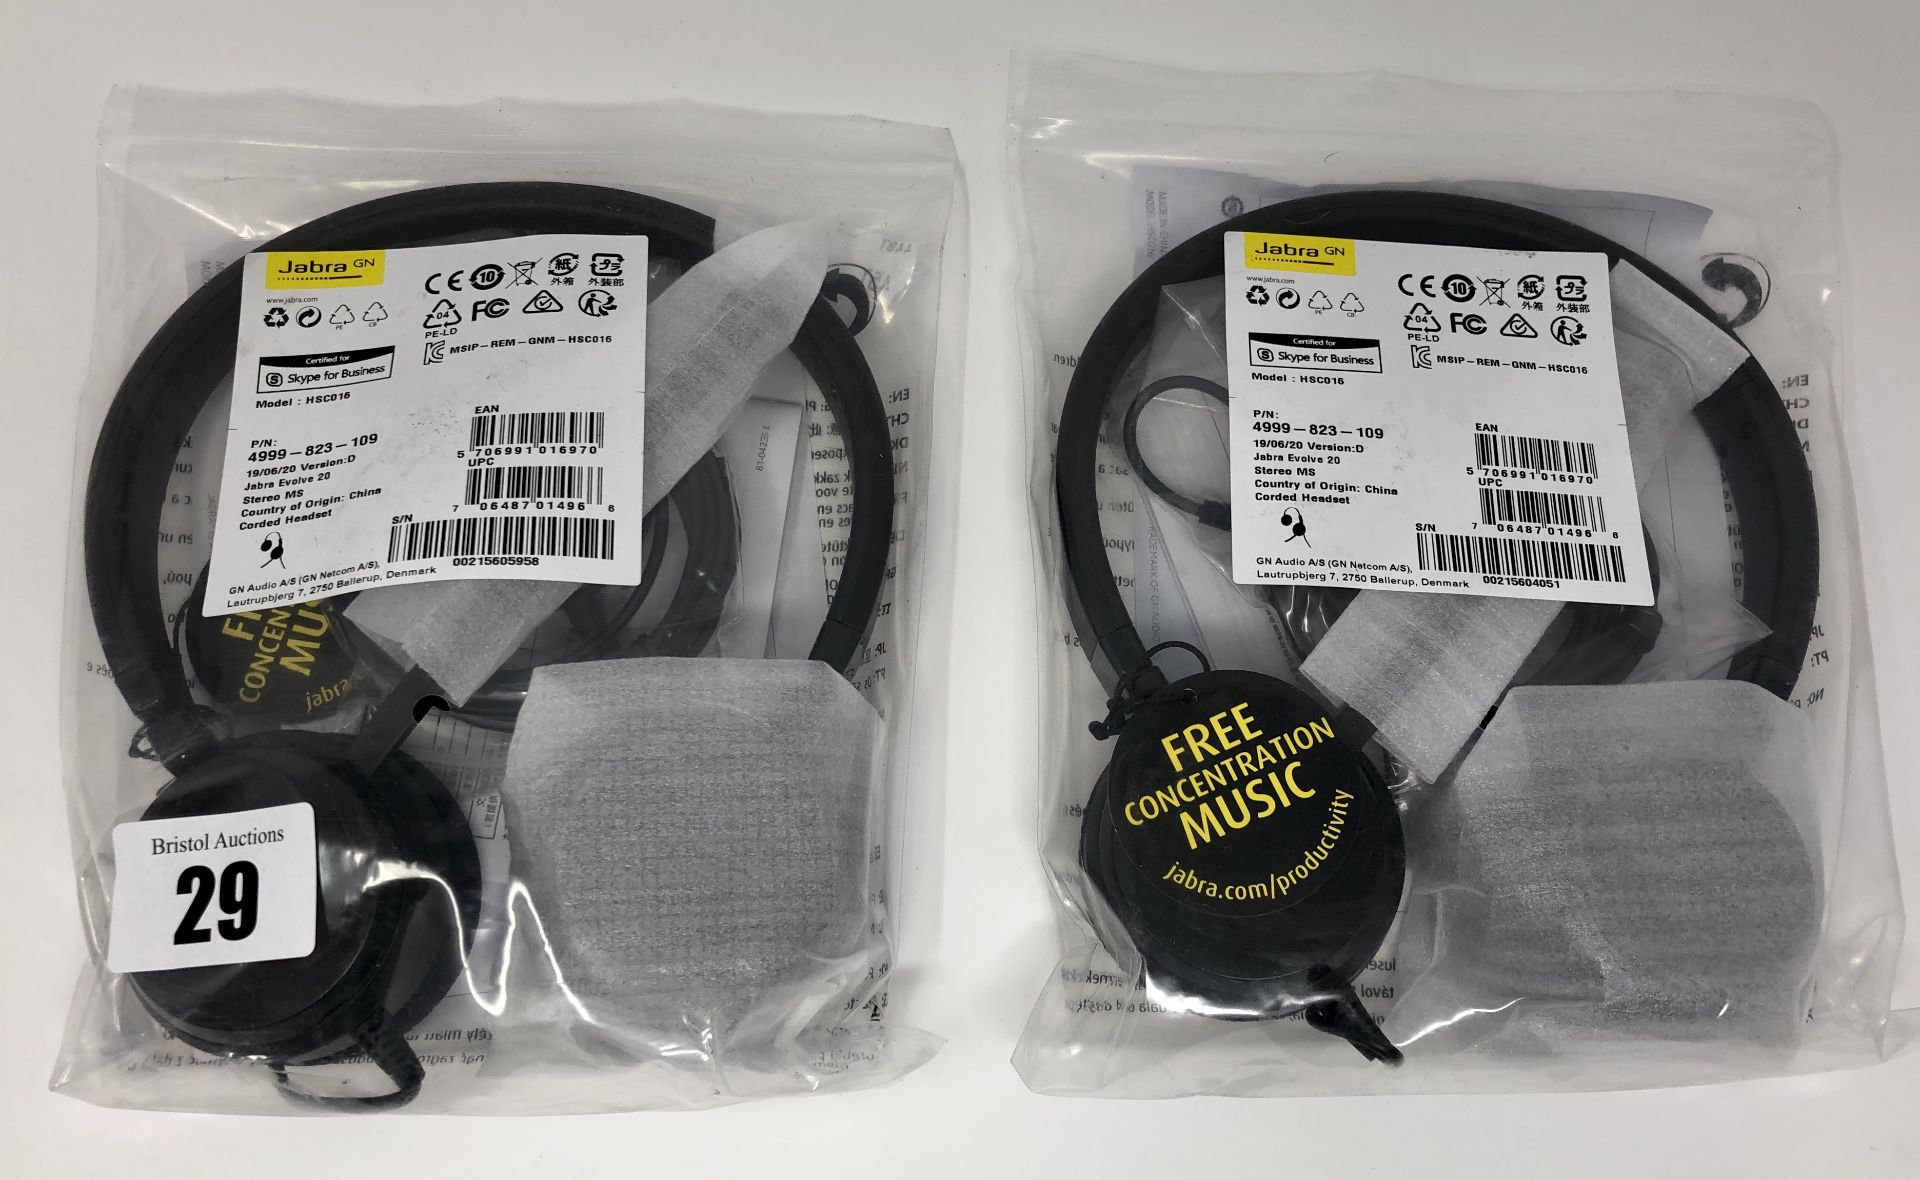 Two as new Jabra Evolve 20 USB Stereo Headsets (P/N: 4999-823-109).